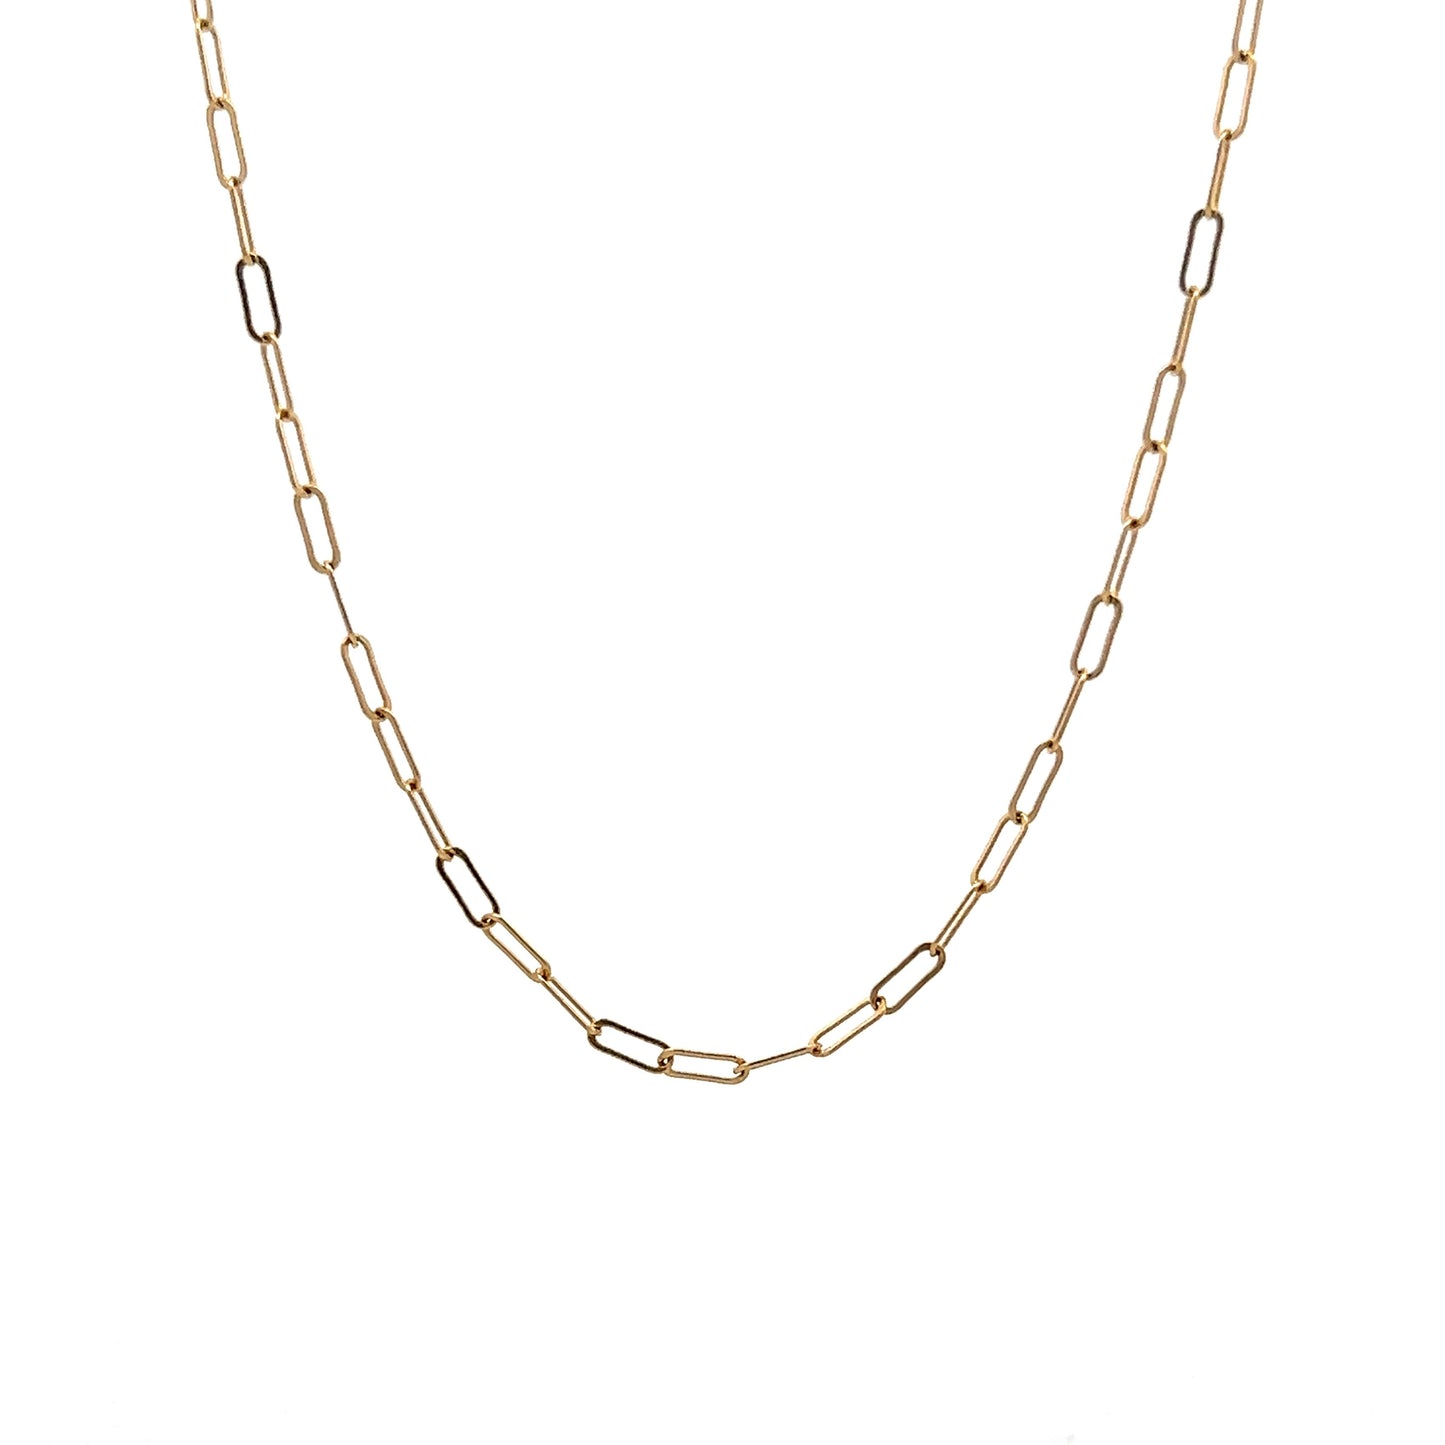 Paperclip Chain Necklace in 14k Yellow Gold